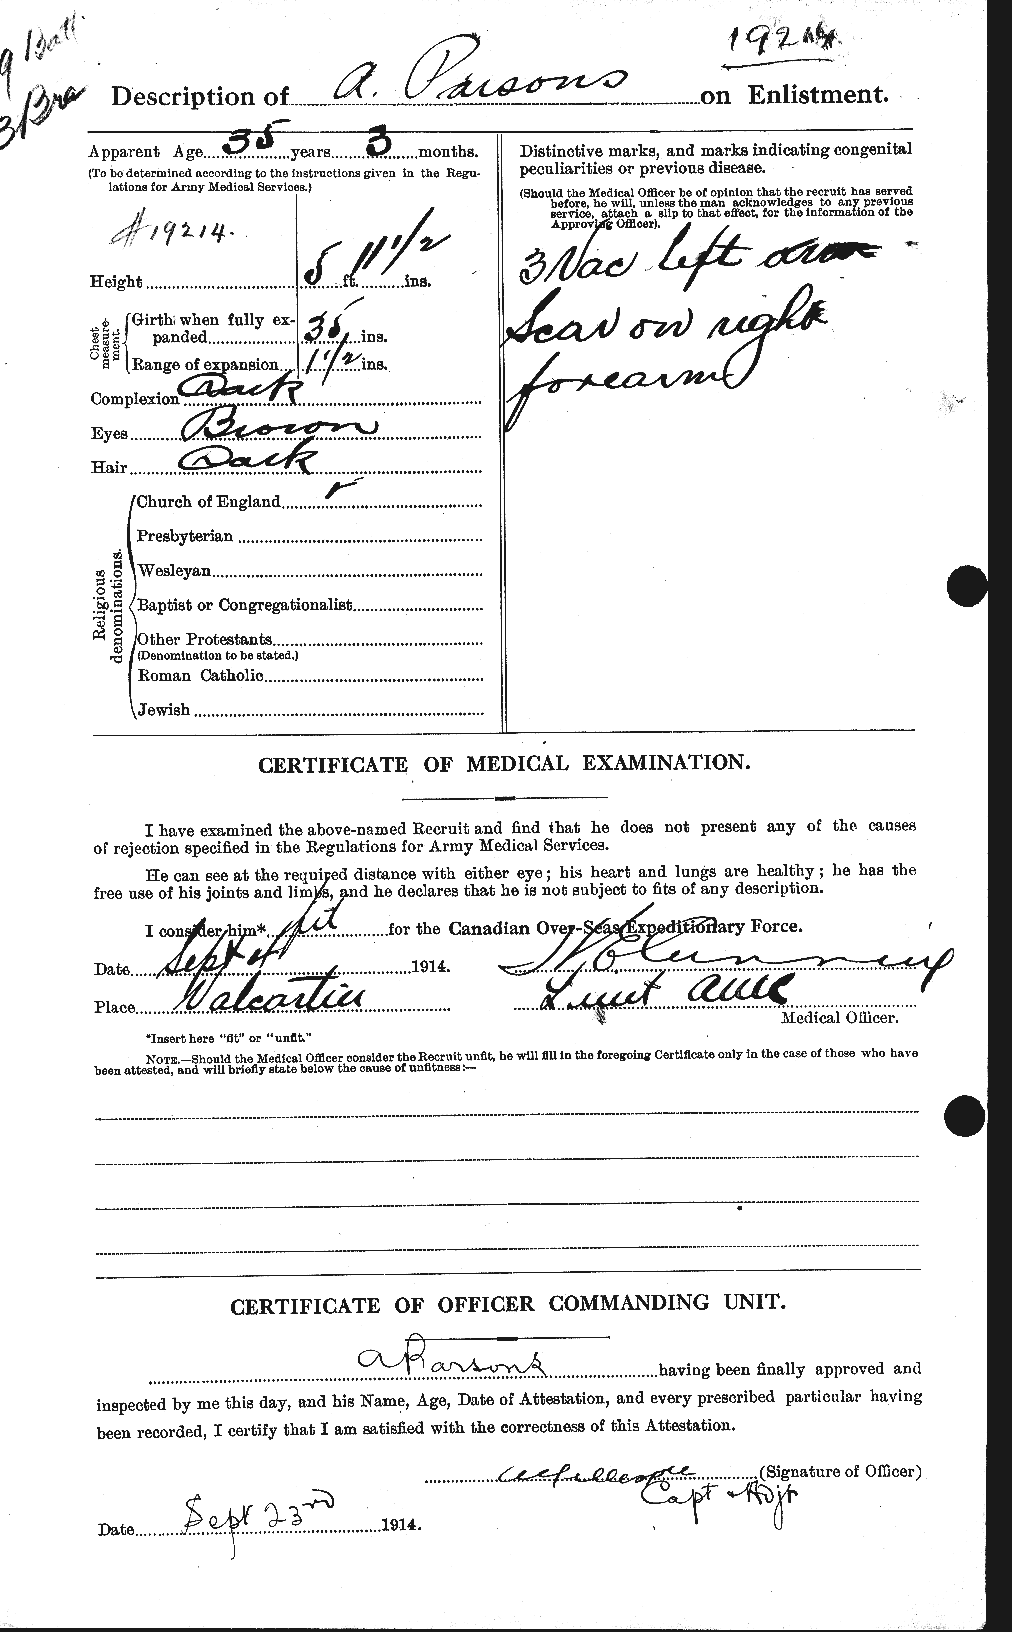 Personnel Records of the First World War - CEF 566773b